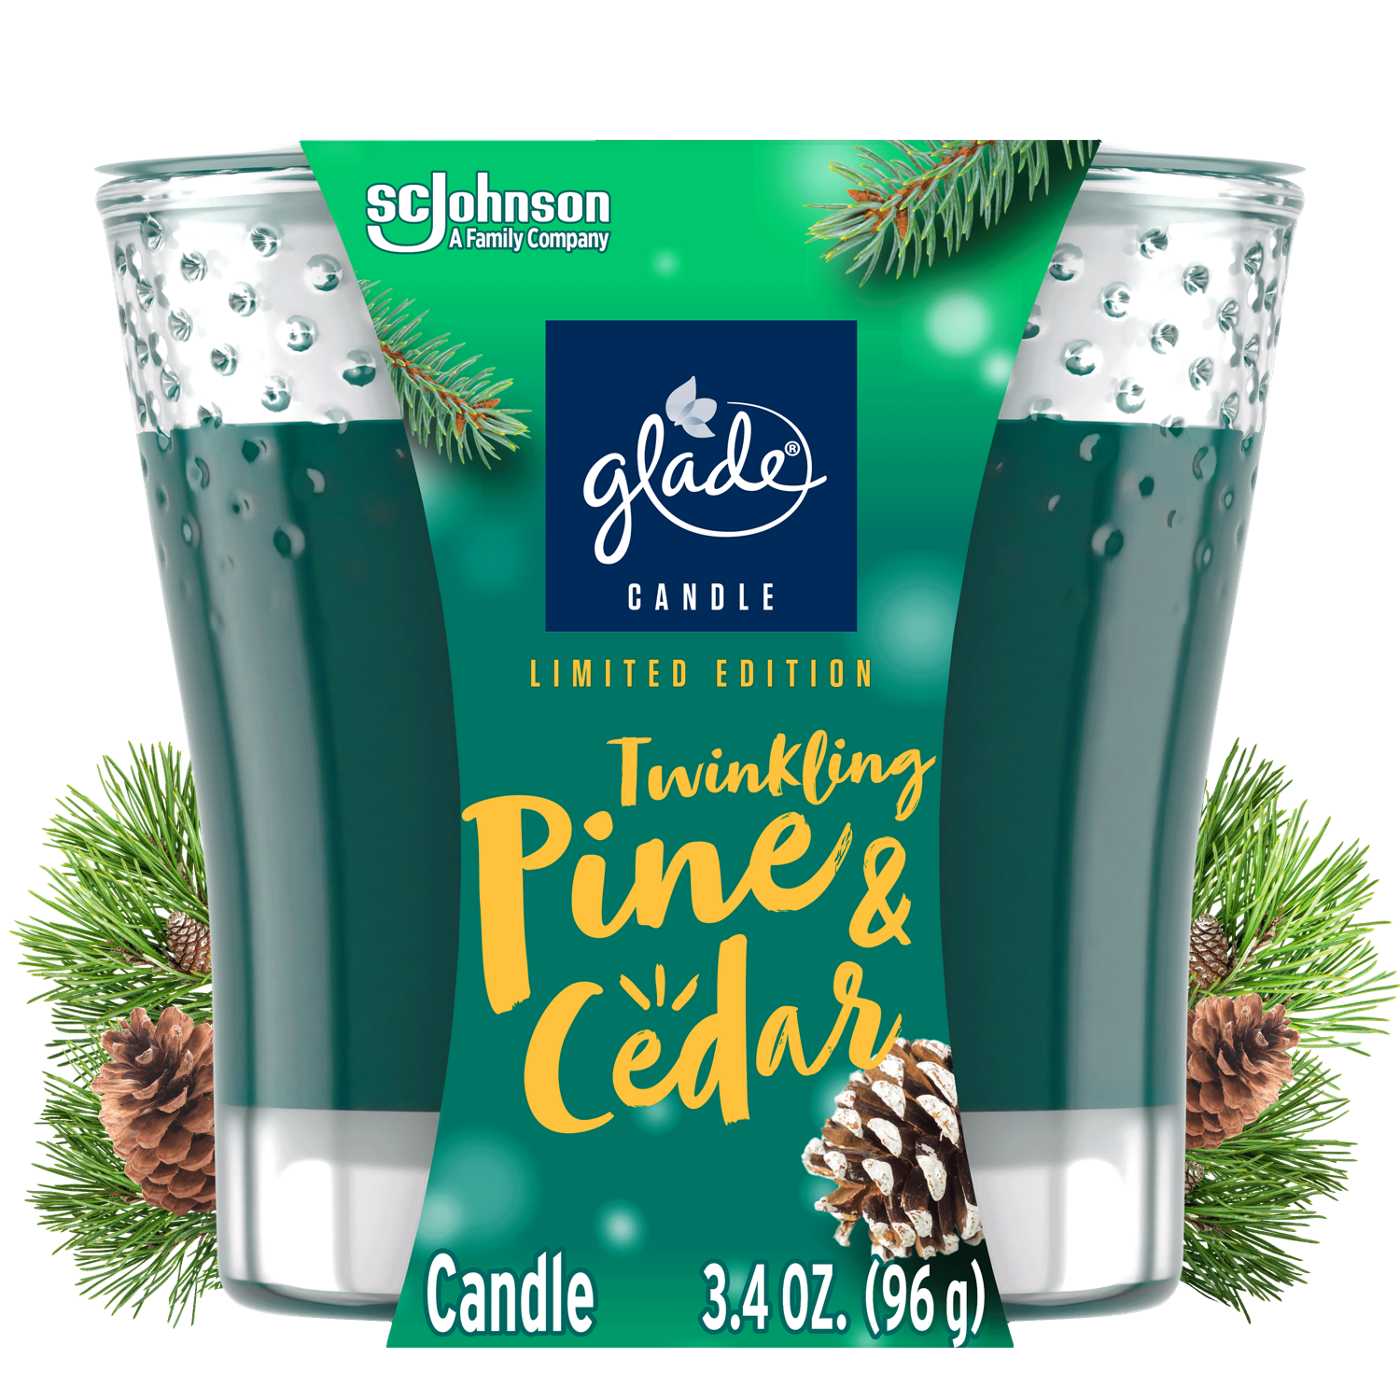 Glade Twinkling Pine & Cedar Candle; image 1 of 2